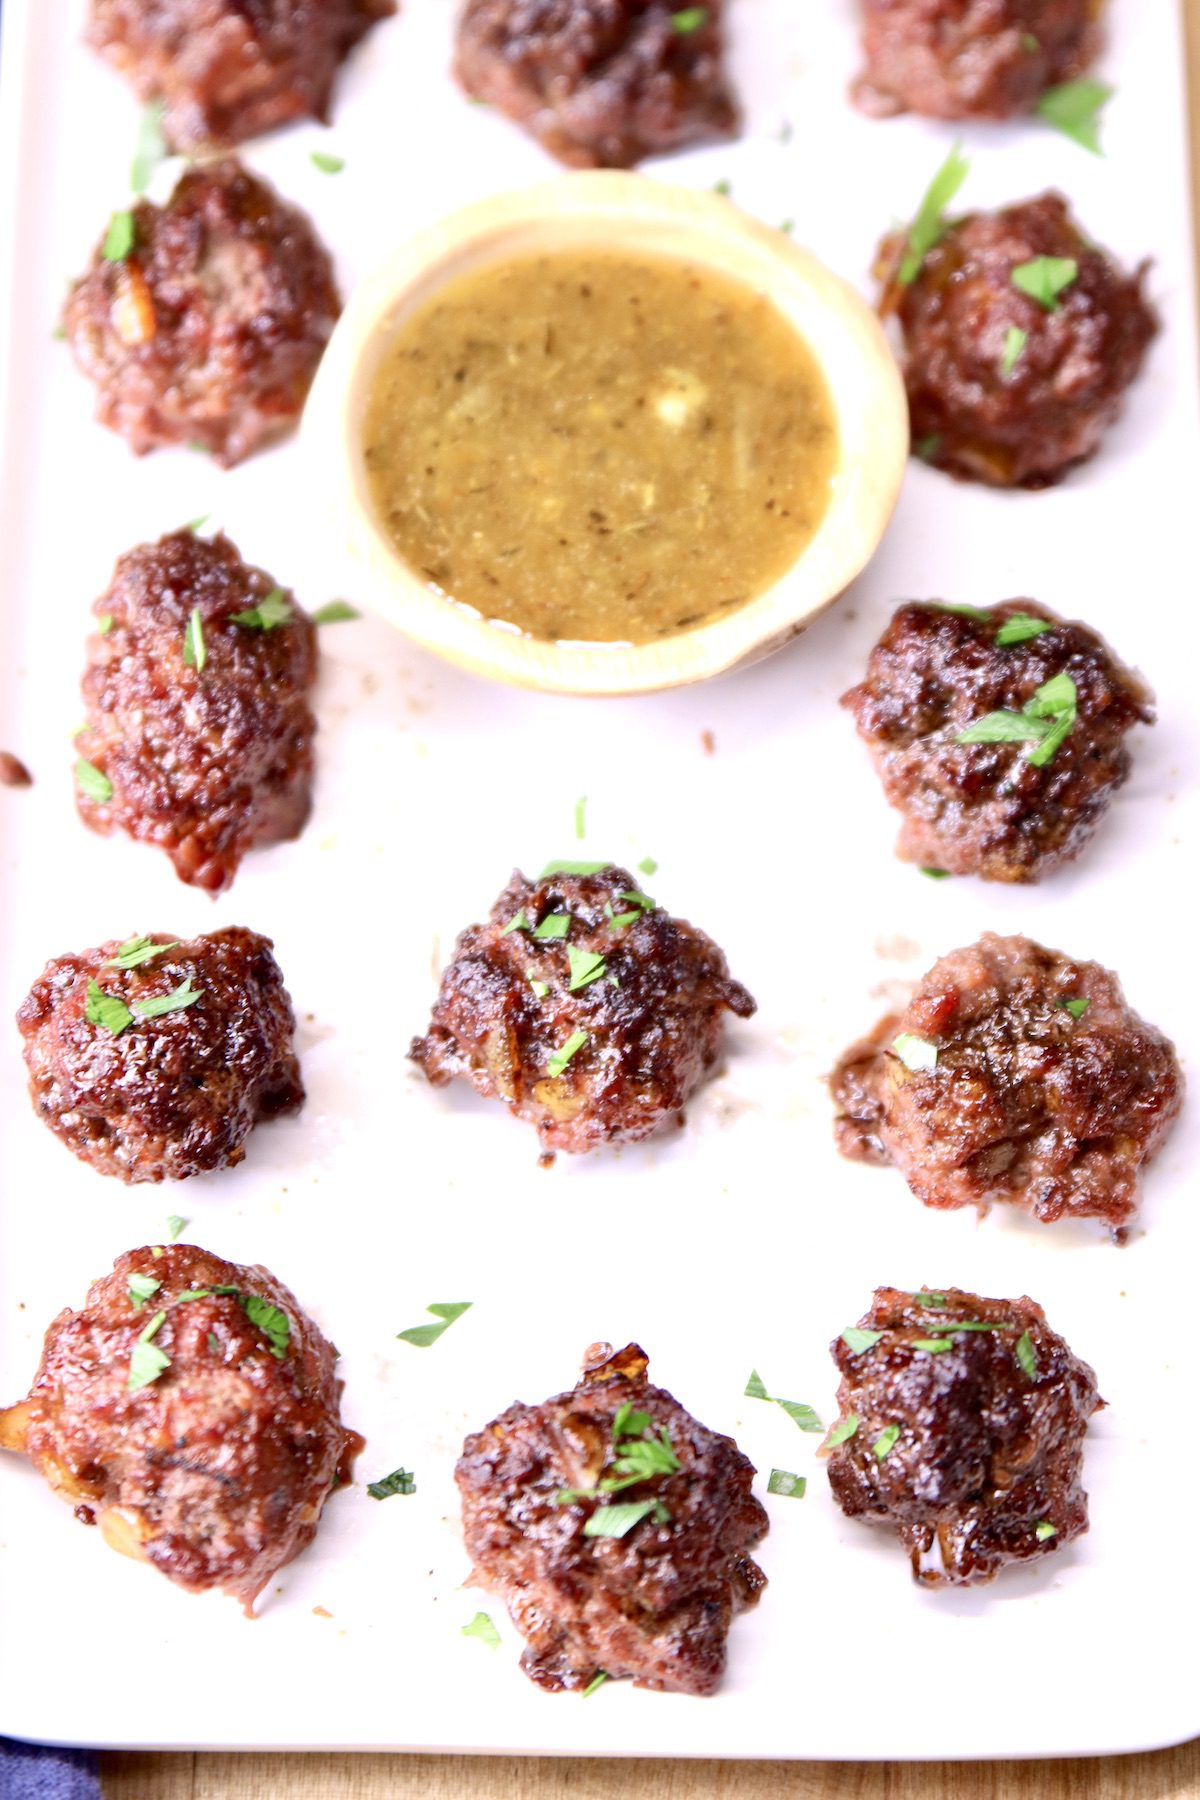 orange ginger dipping sauce on a platter with meatballs